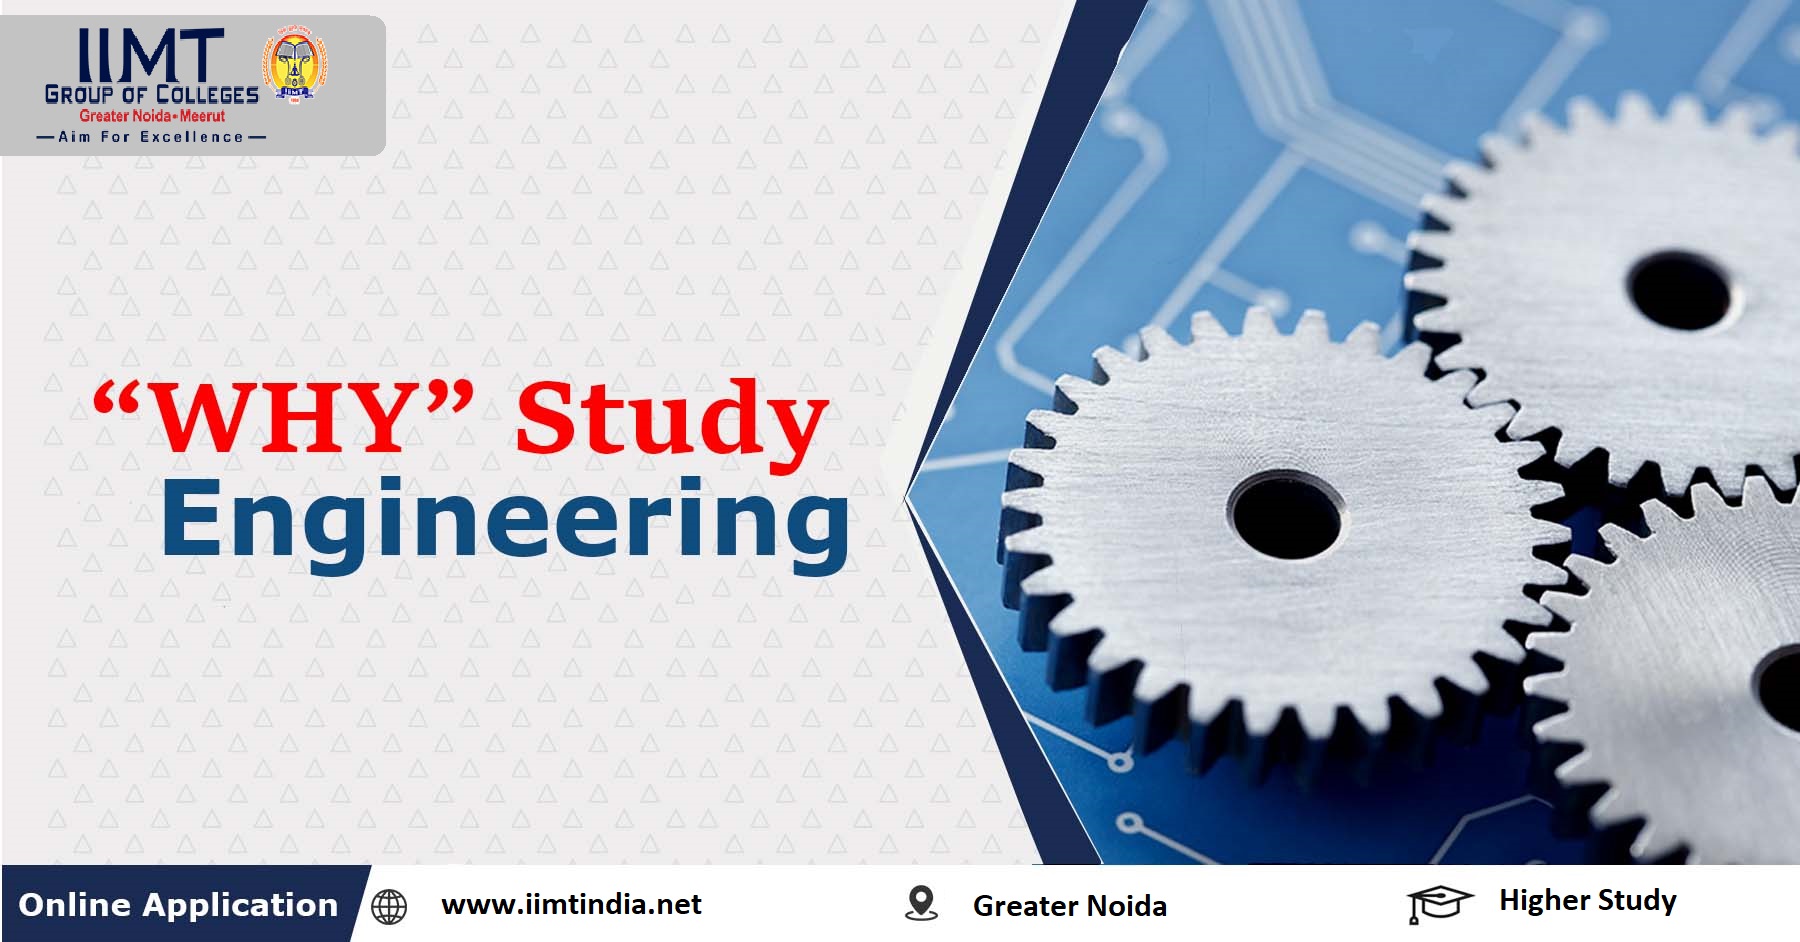 10 Reasons to Study Engineering - IIMT Group of Colleges